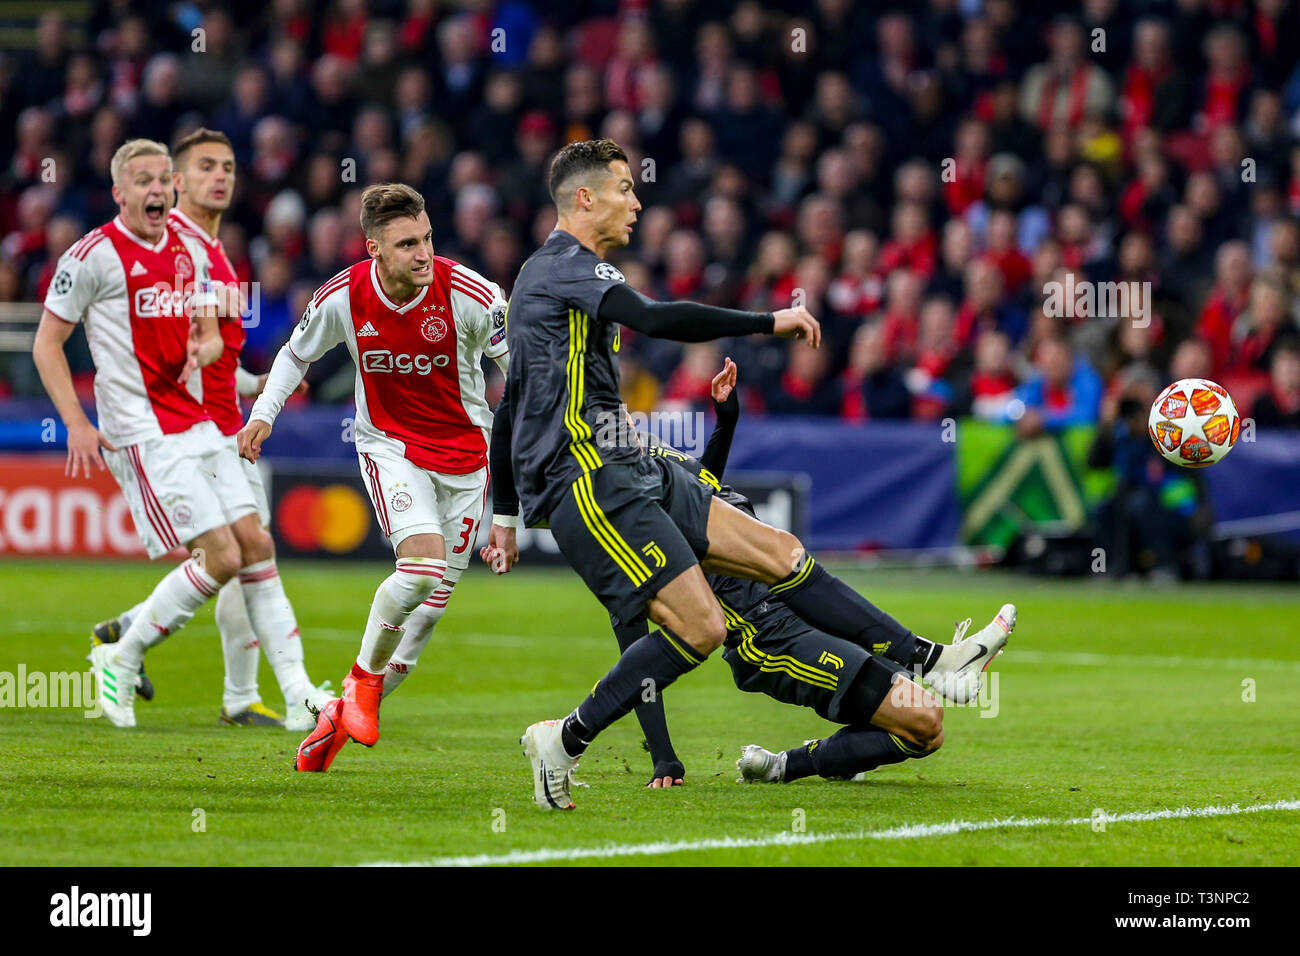 Amsterdam, Holanda. 10th Apr, 2019. Cristiano Ronaldo of Juventus during  the match between Ajax and Juventus held at the Johan Cruyff Stadium in  Amsterdam. The match is valid for the quarterfinals of